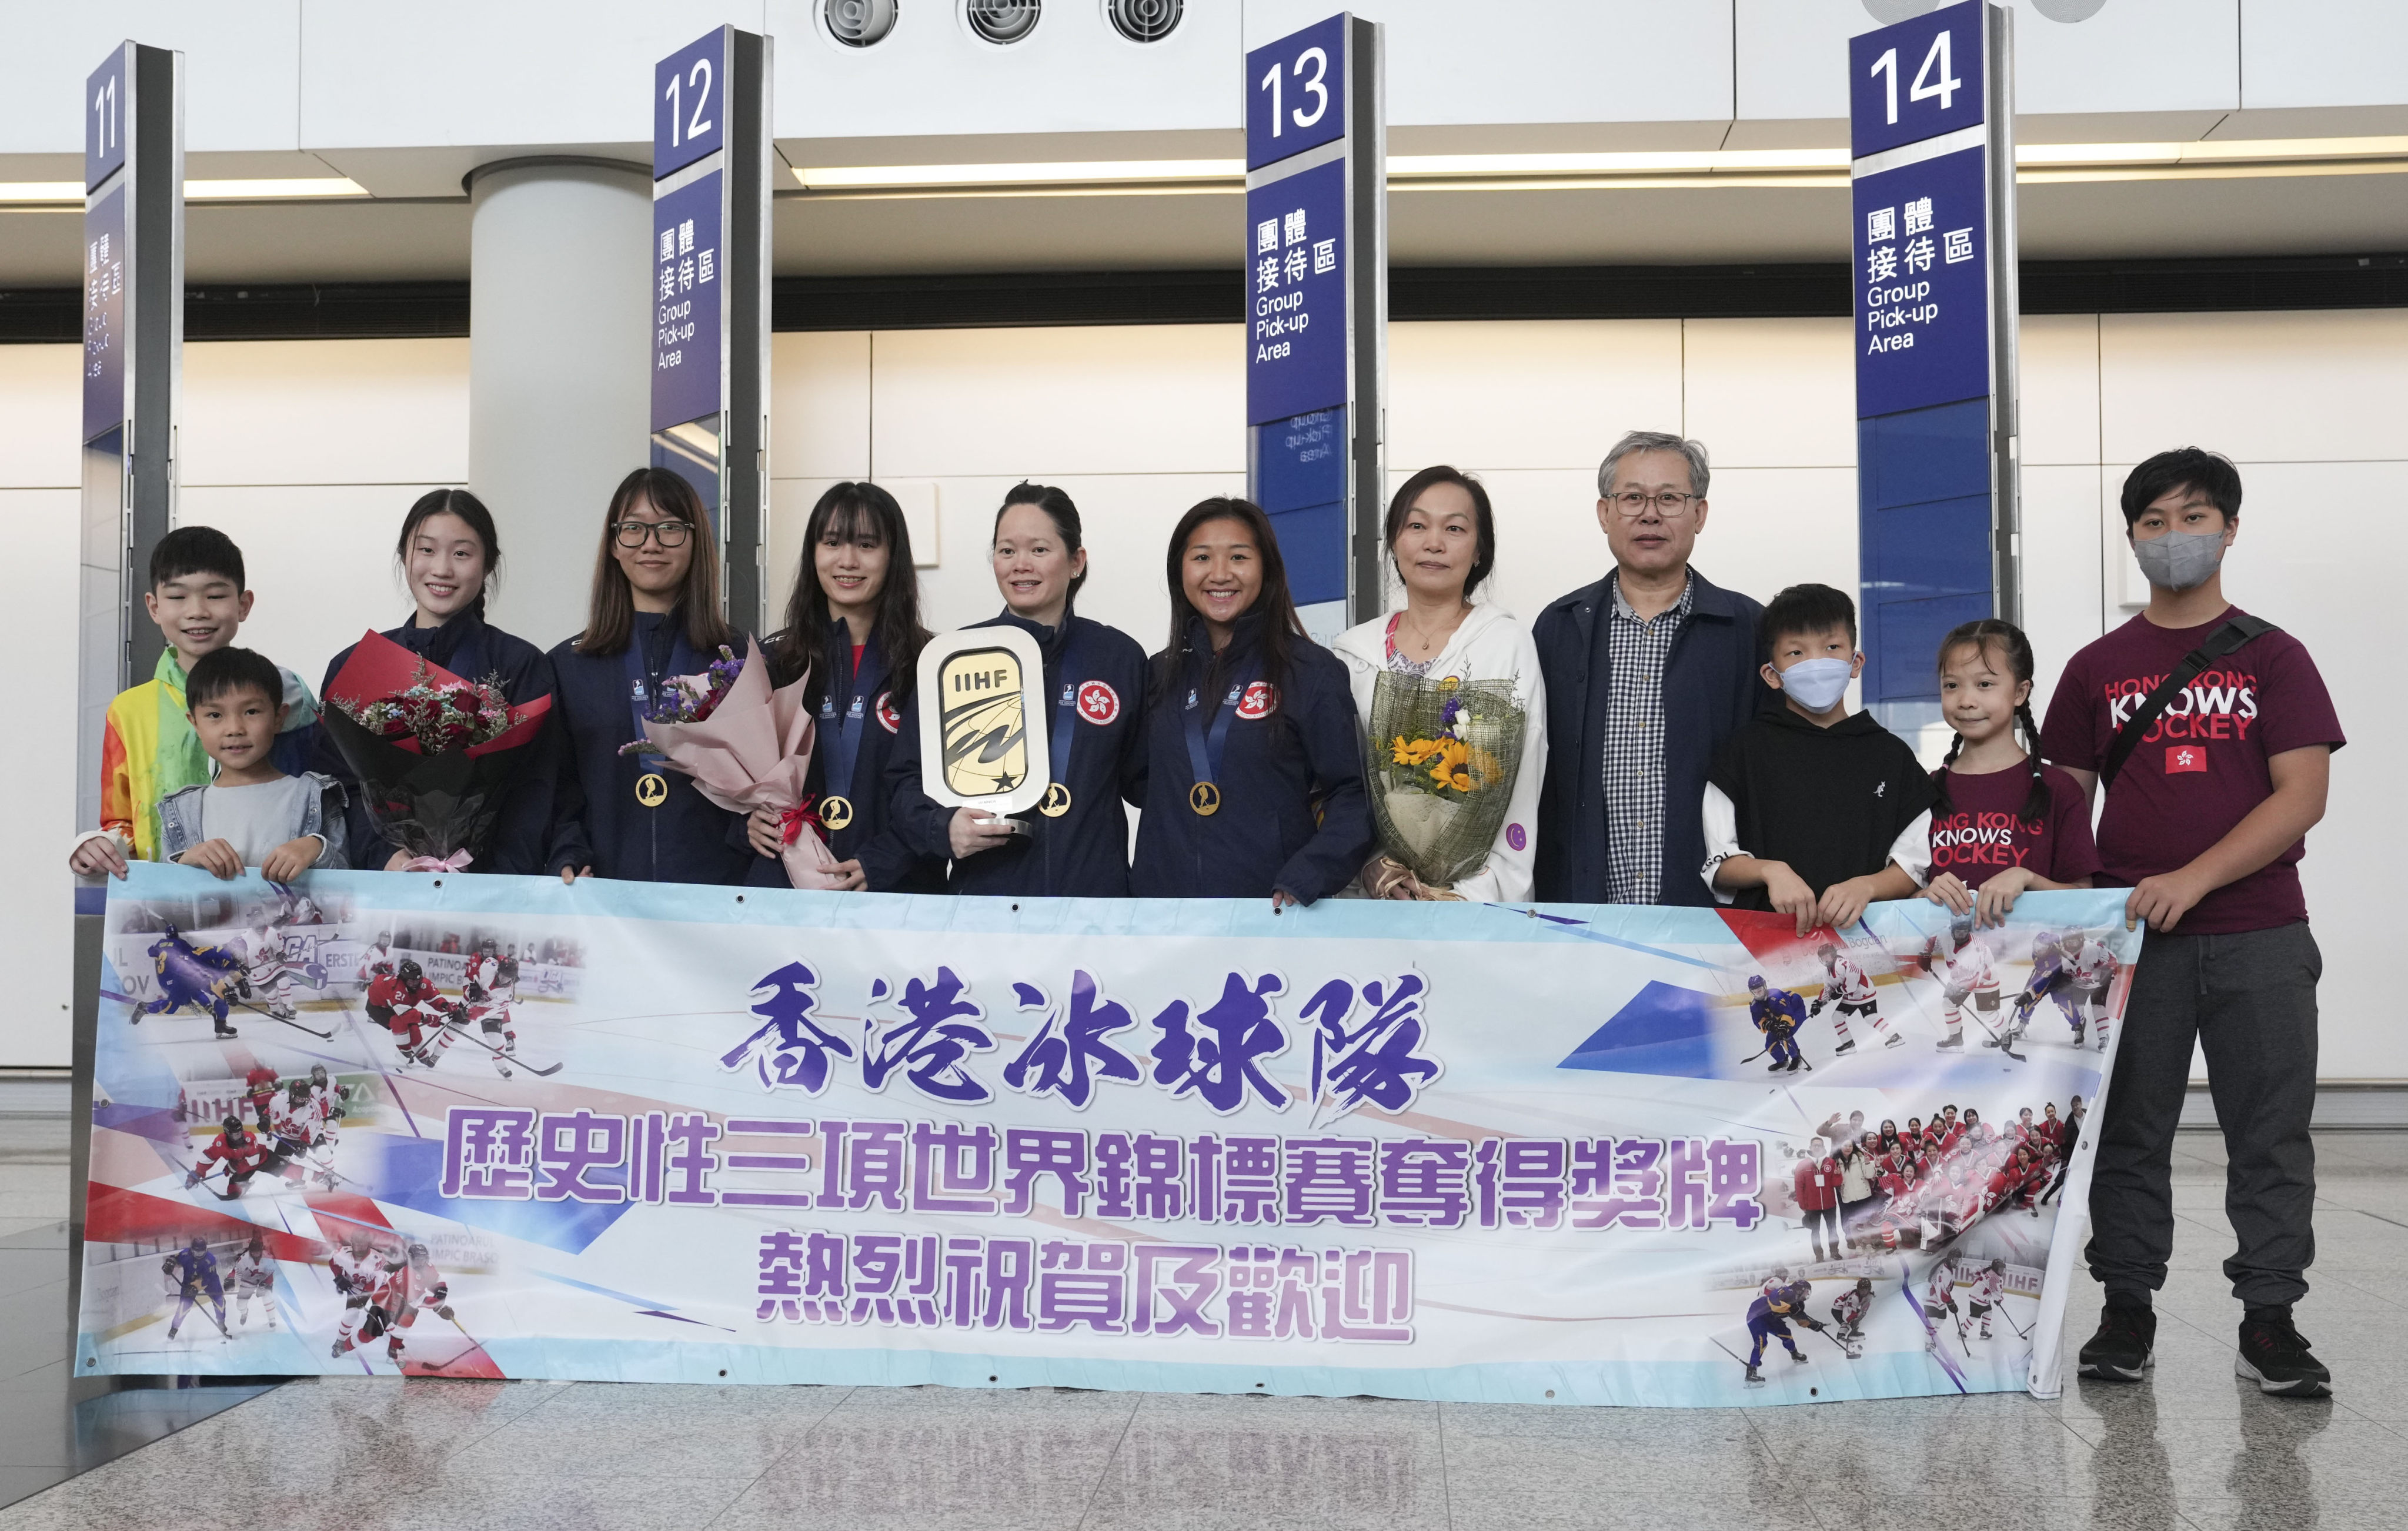 The women’s ice hockey team returns to Hong Kong after a historic division win at the world championship. Photo: Elson Li